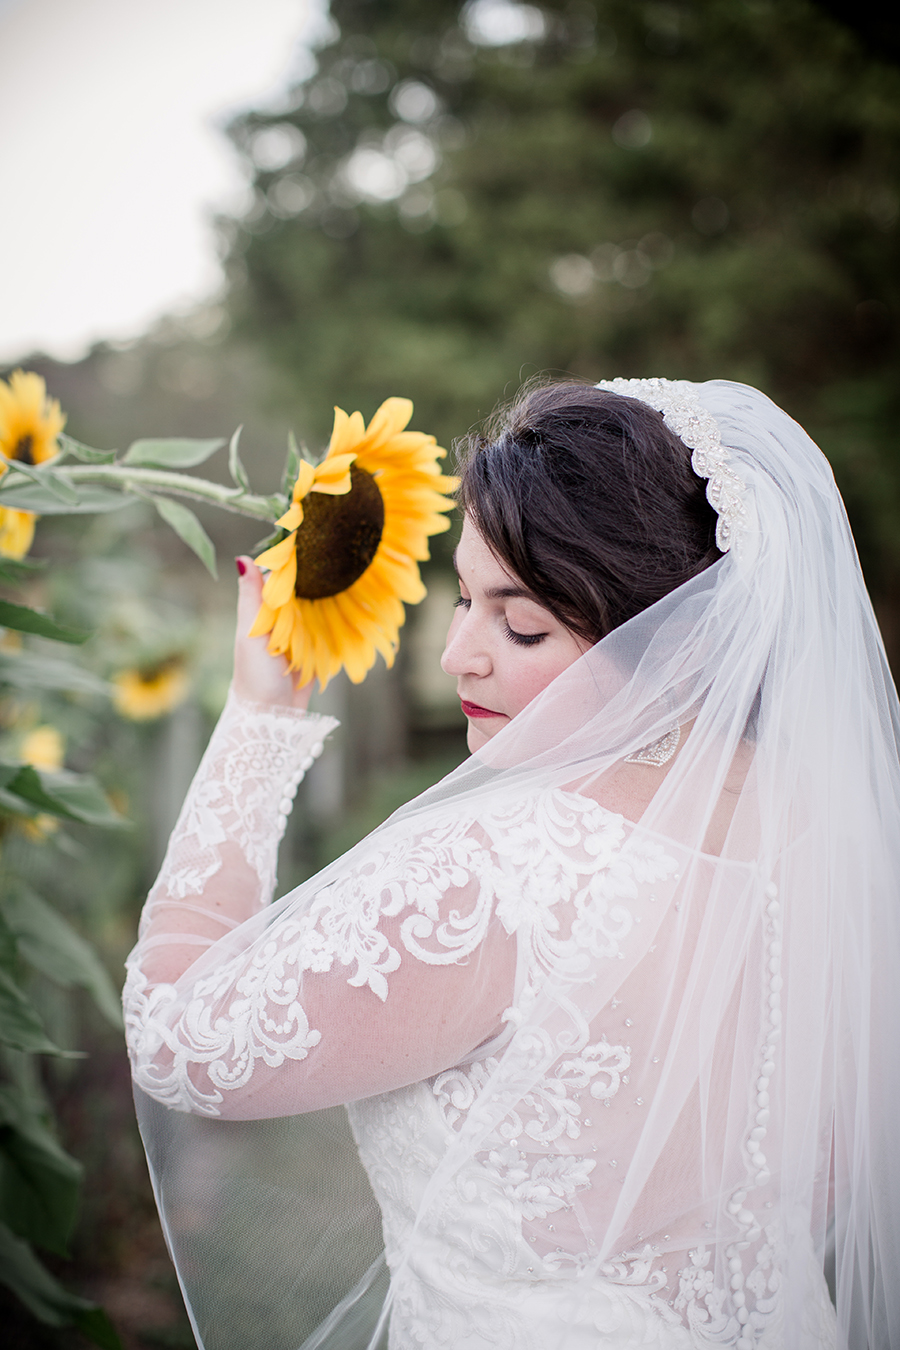 Smelling a sunflower at this bridal session at The Barn at High Point Farms by Knoxville Wedding Photographer, Amanda May Photos.